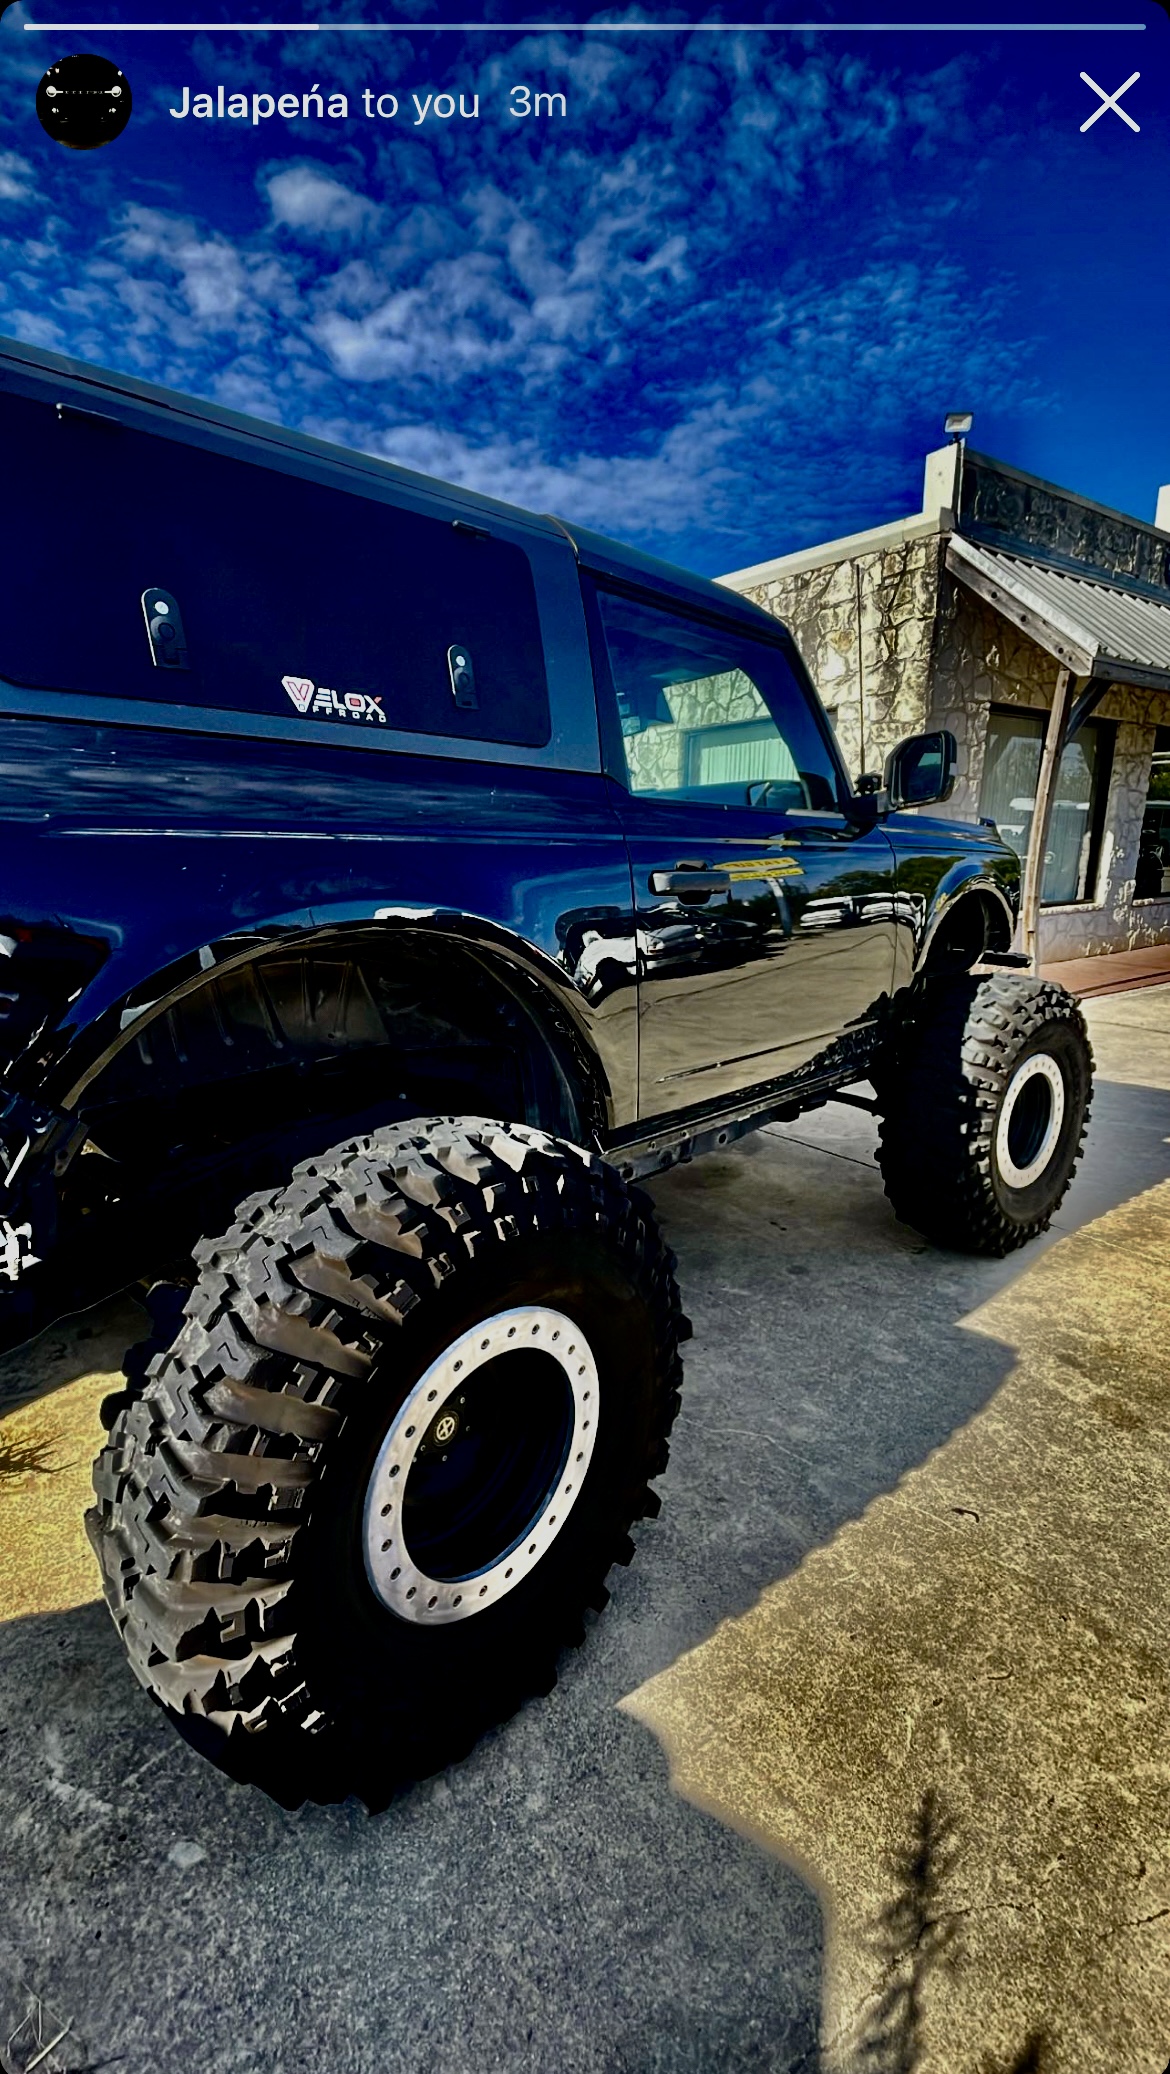 Ford Bronco @4Lo_lyfe my build -- Bronco 2-Door on 40’s and 3" inch body lift 7240B161-5986-43C7-ADDE-A3F9787F70DF